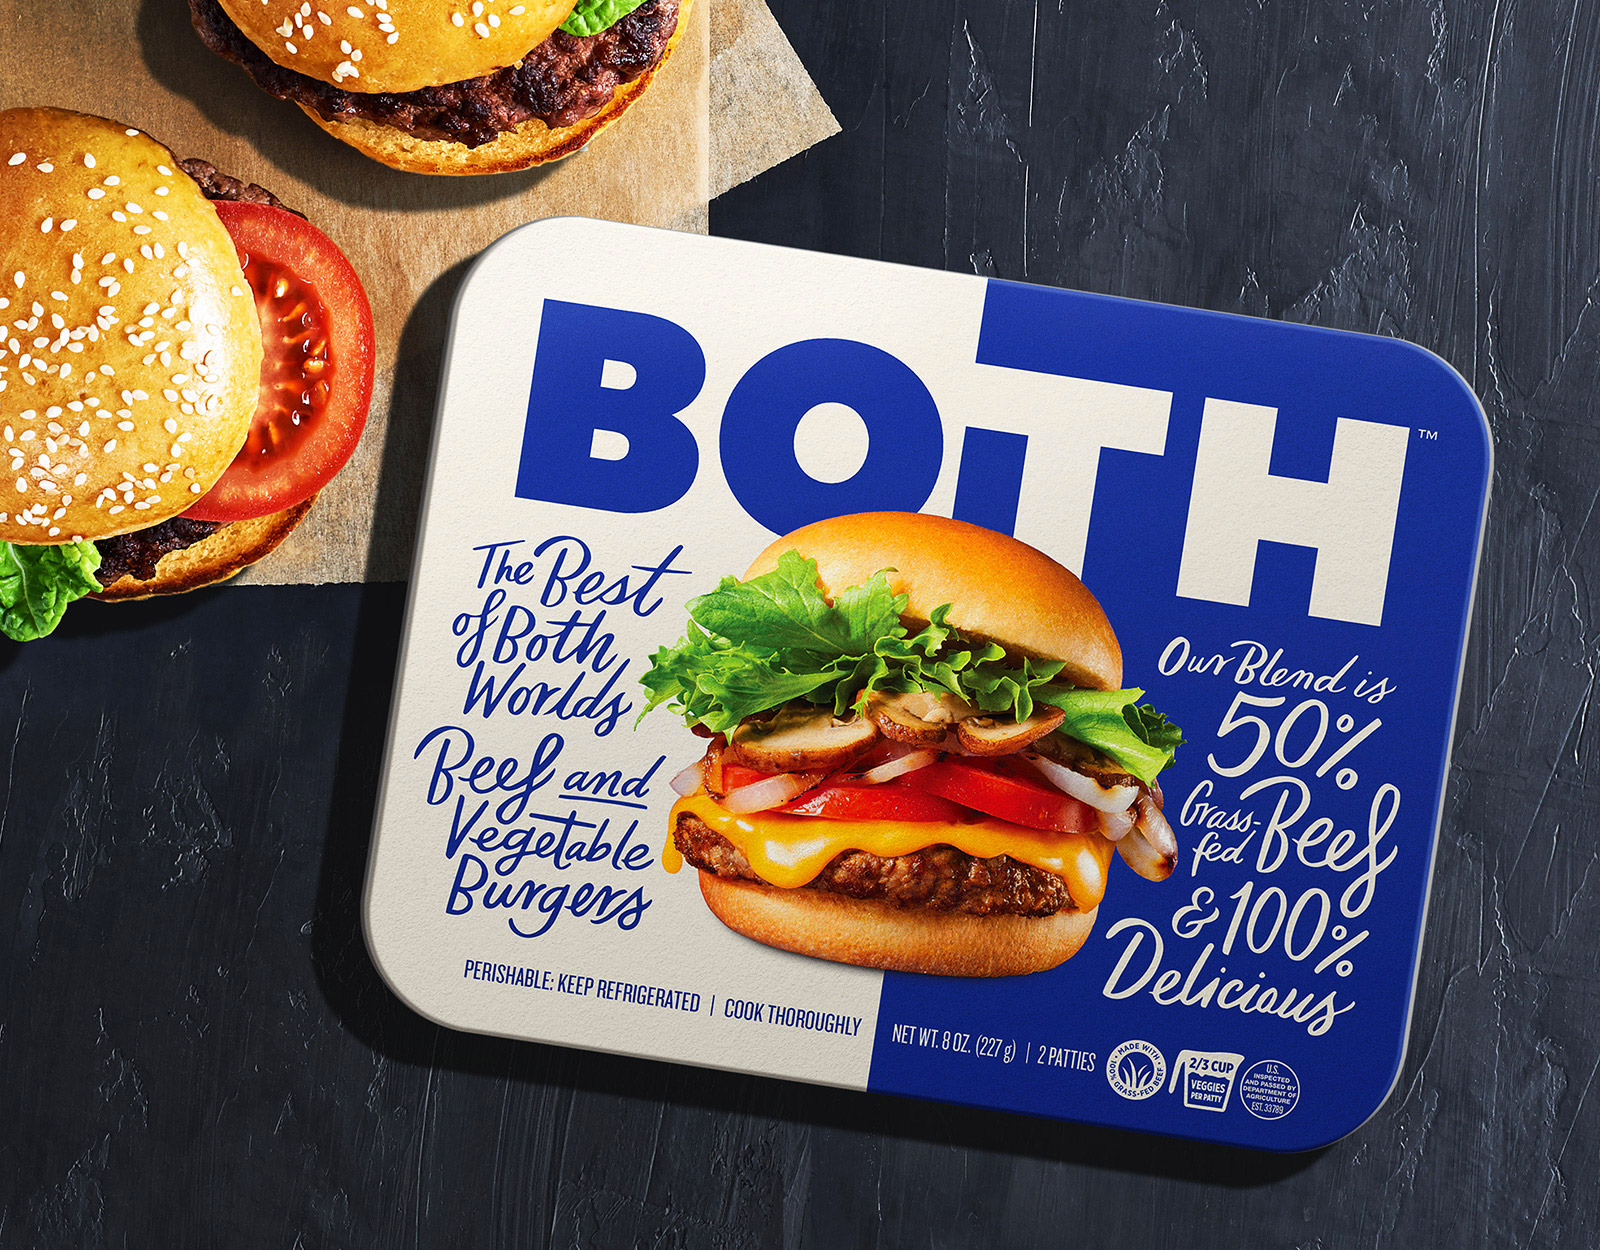 Pavement Designs the Branding for Both, the Burger That’s Going to Change Everything